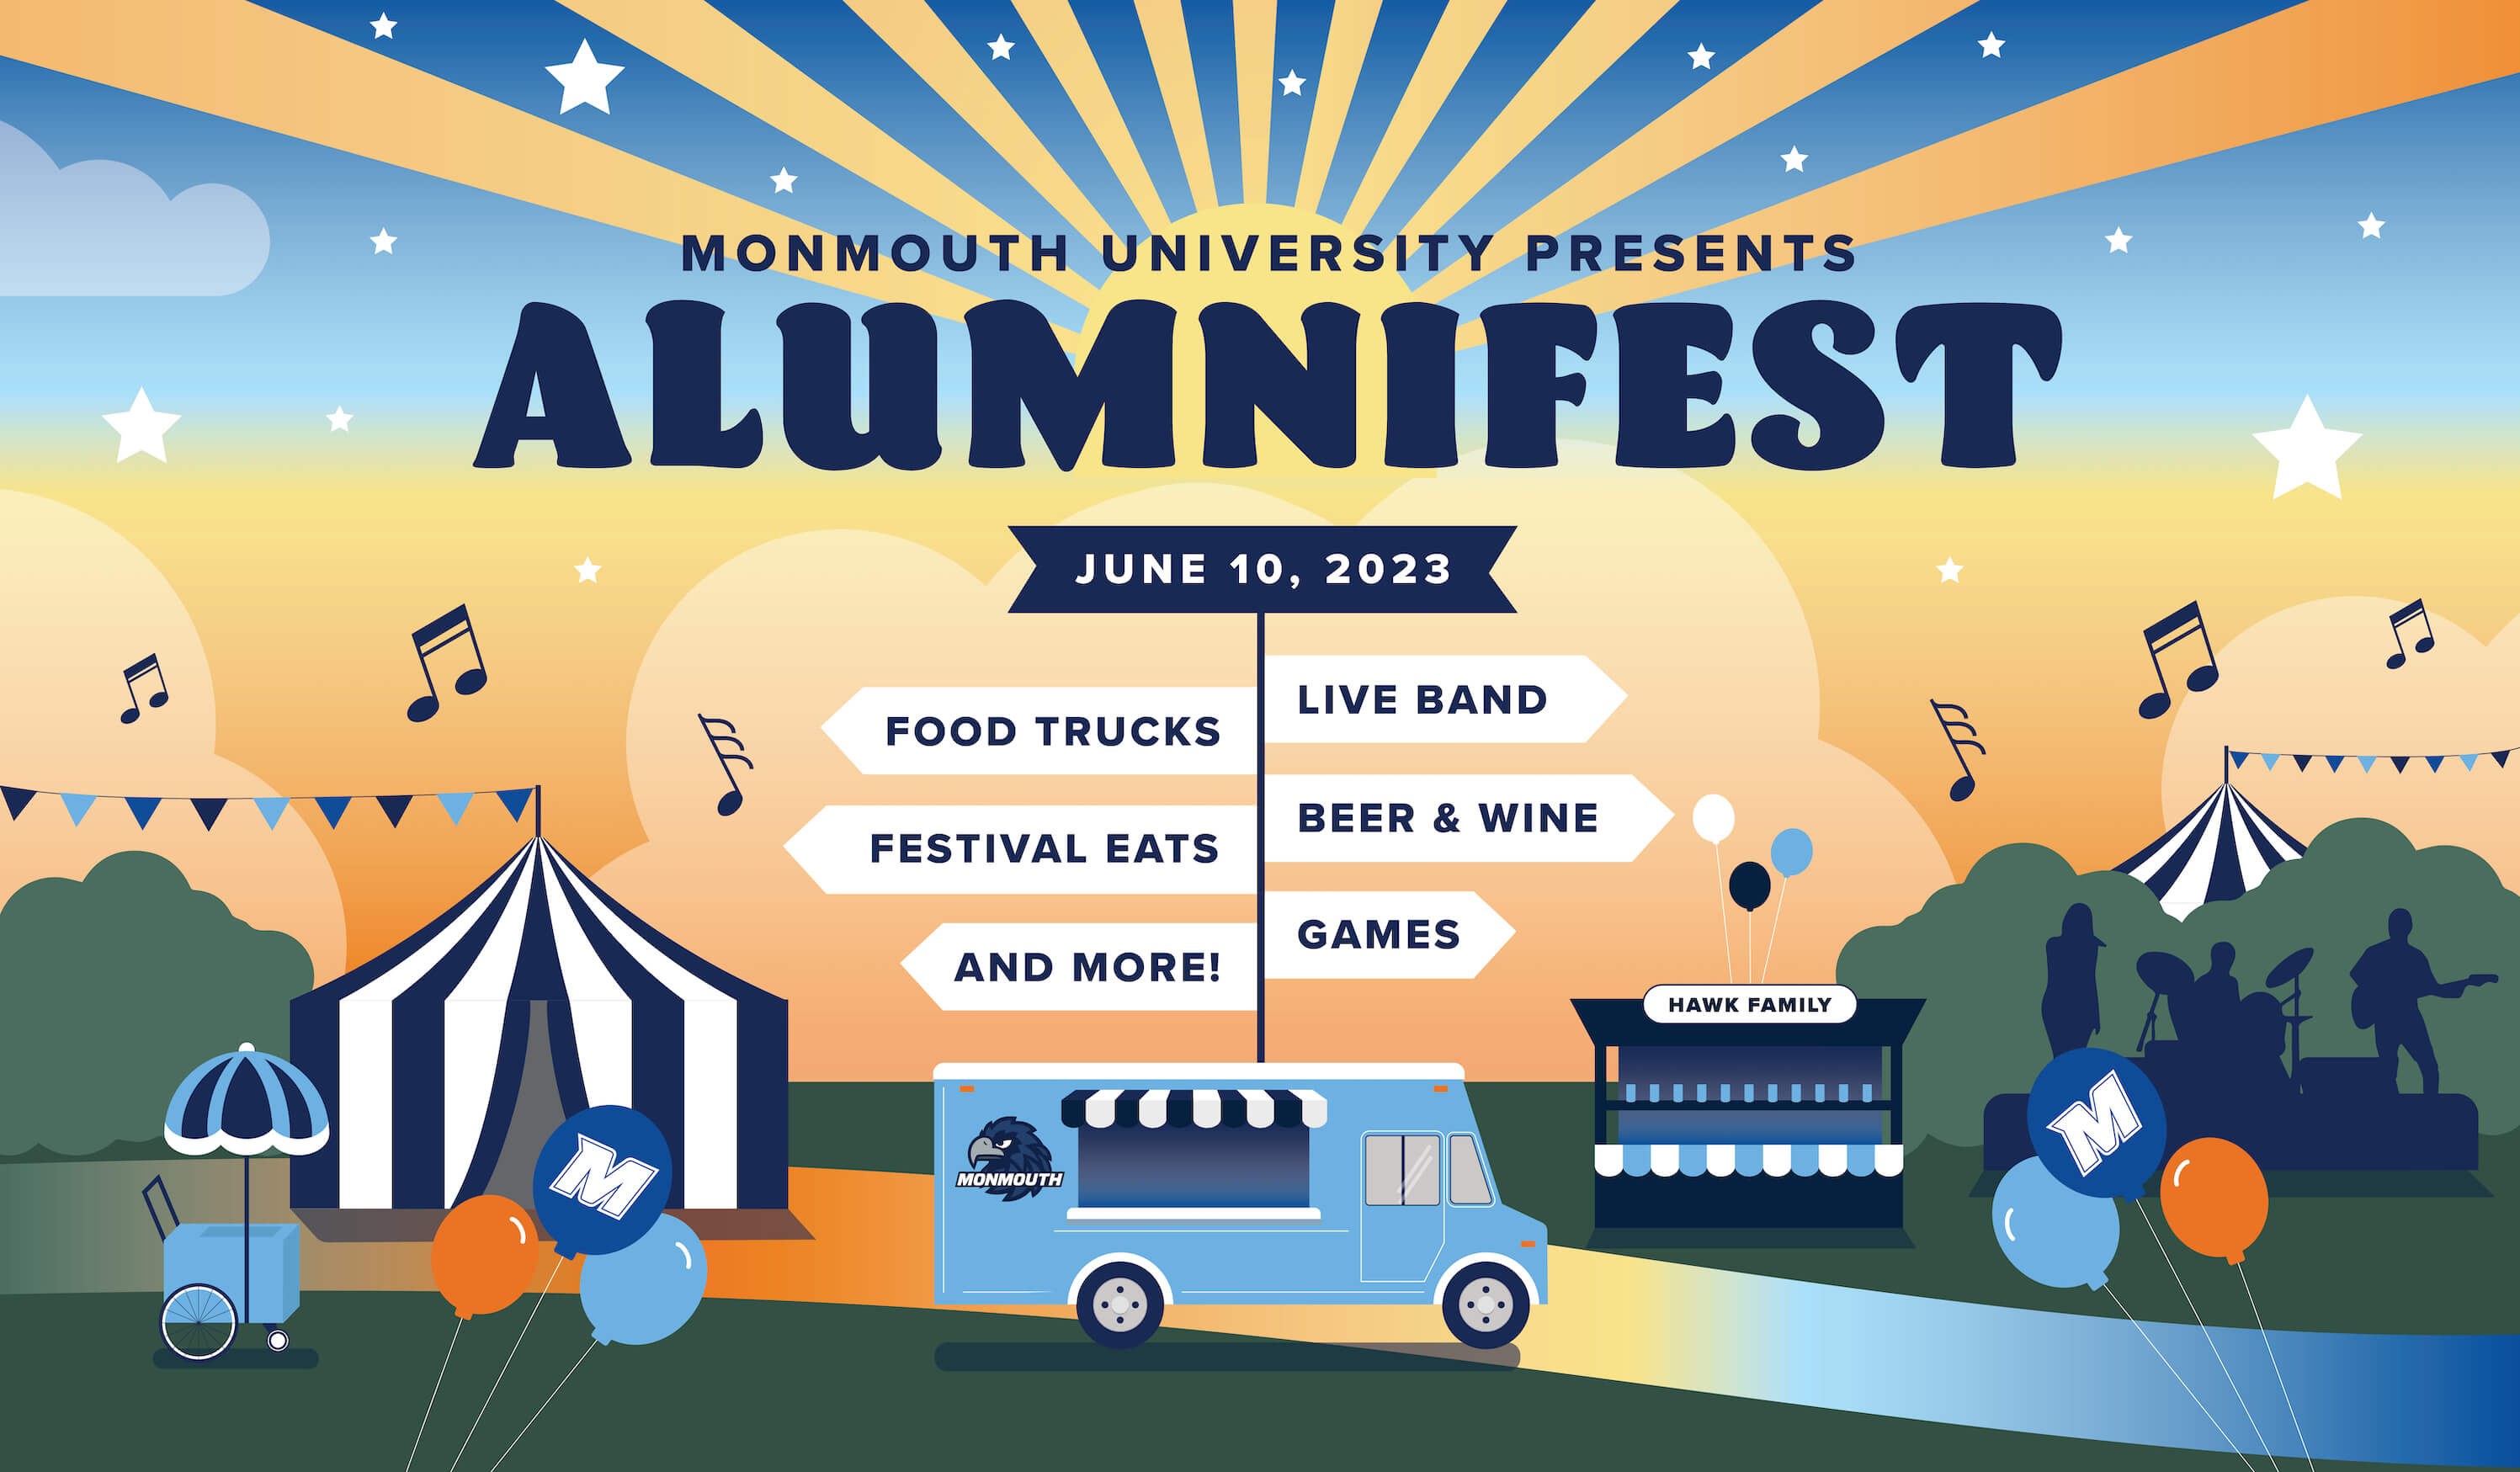 Monmouth University Presents: AlumniFest, June 10, 2023. Live Band, Food Trucks, Beer & Wine, BBQ, Games, and More!